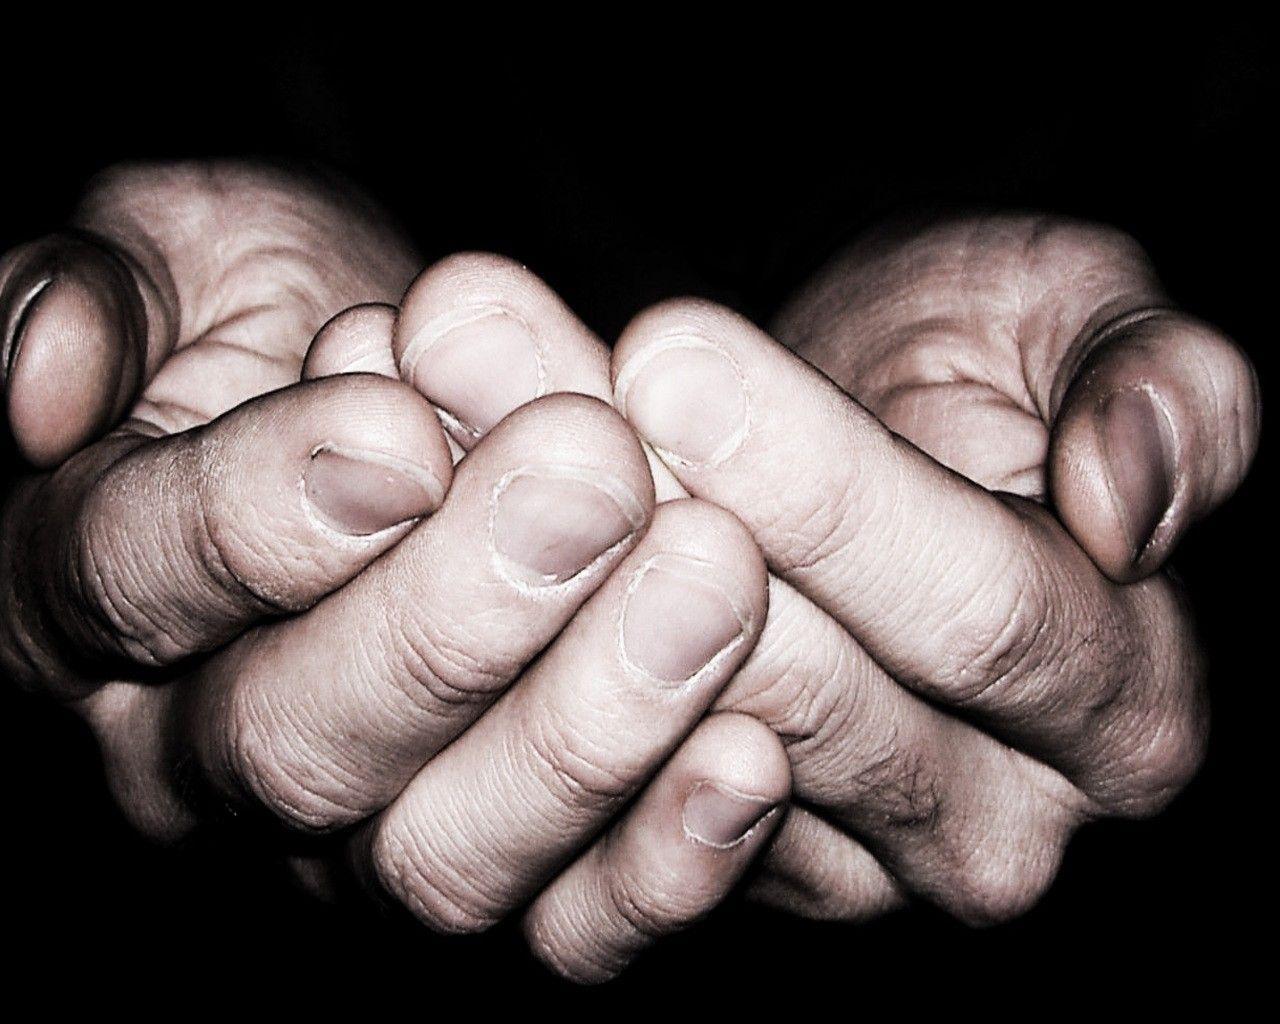 The Image of Hands Praying 1280x1024 HD Wallpaper